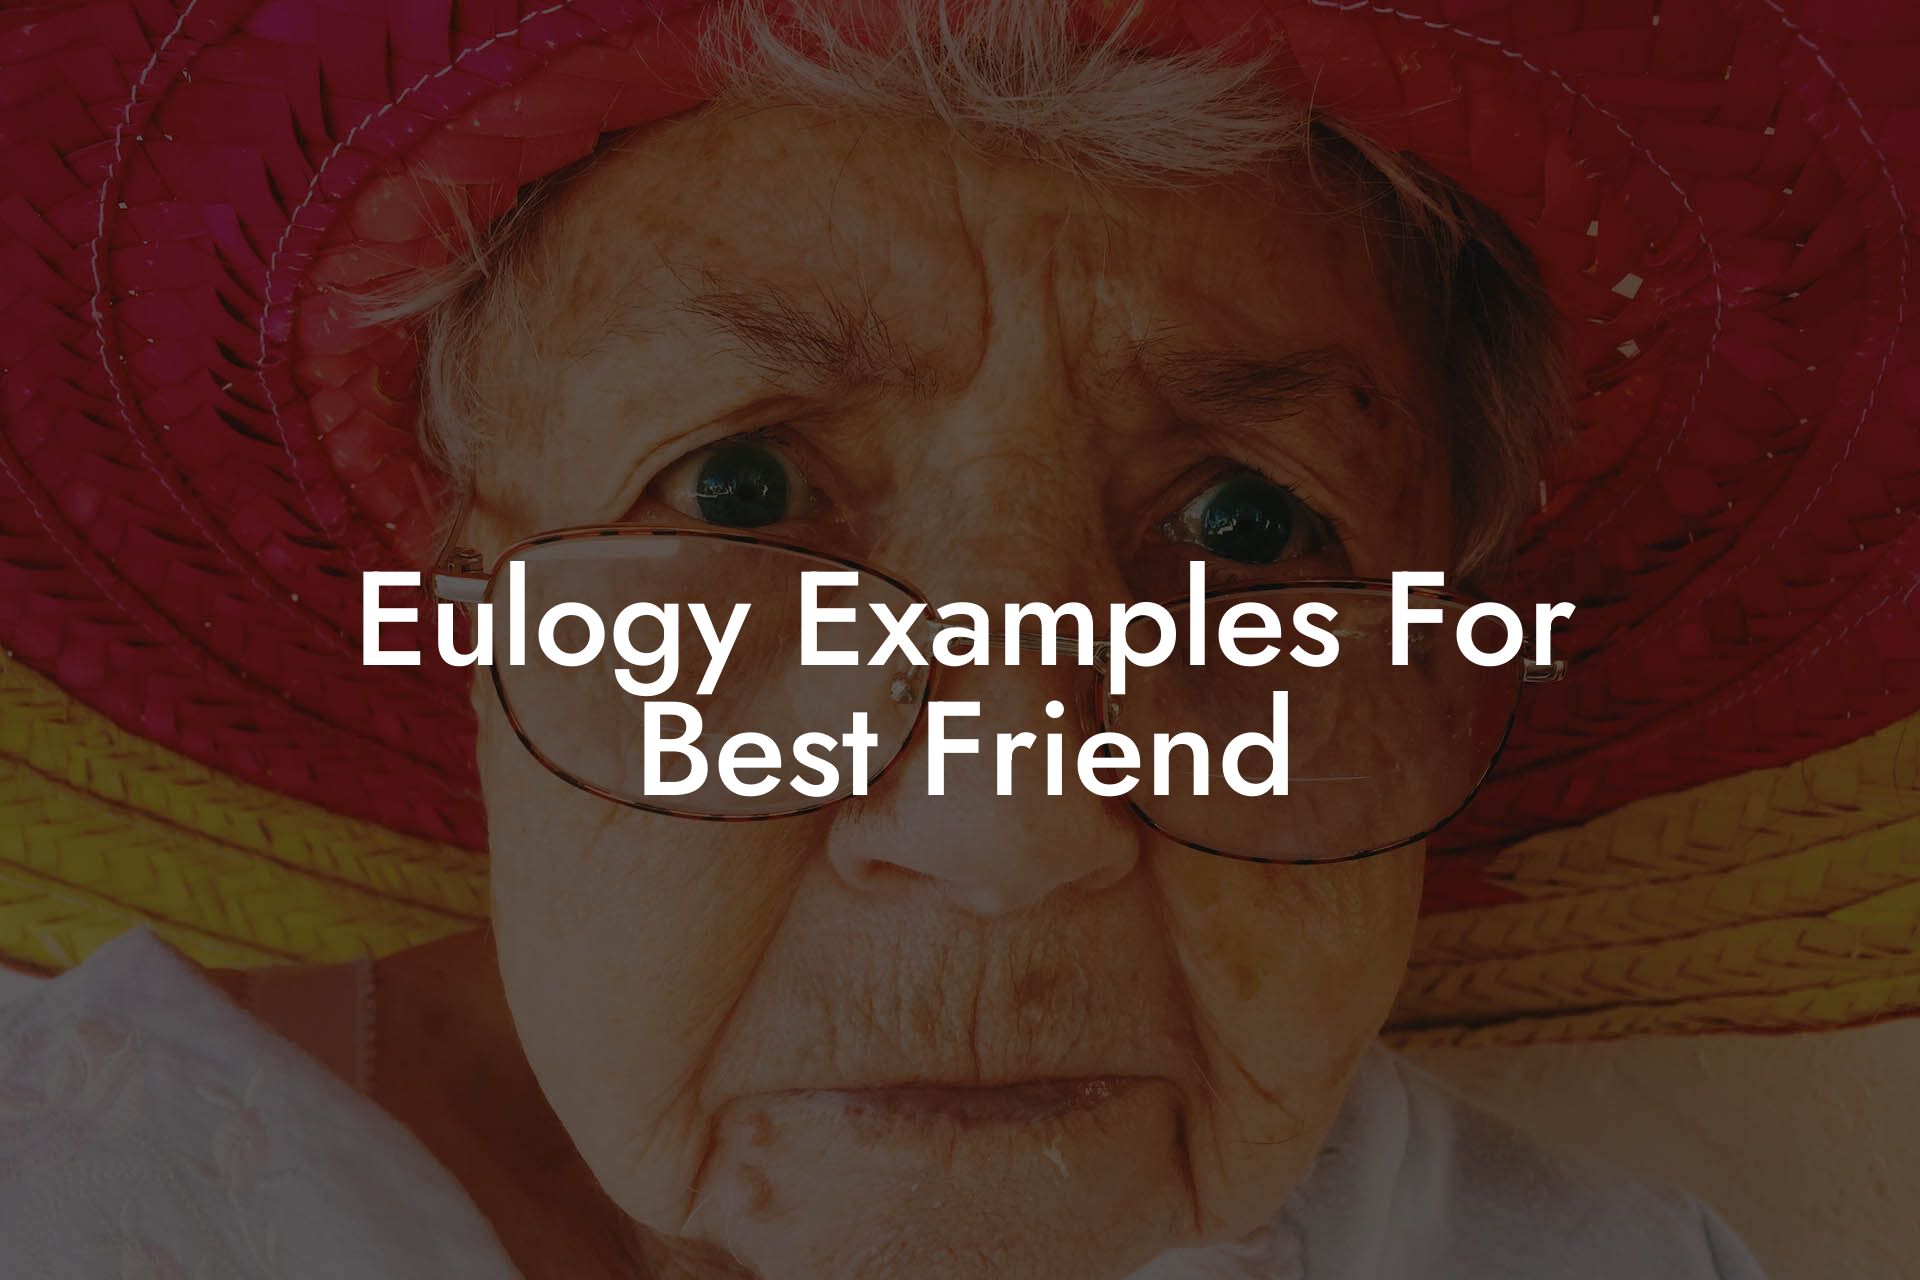 Eulogy Examples For Best Friend